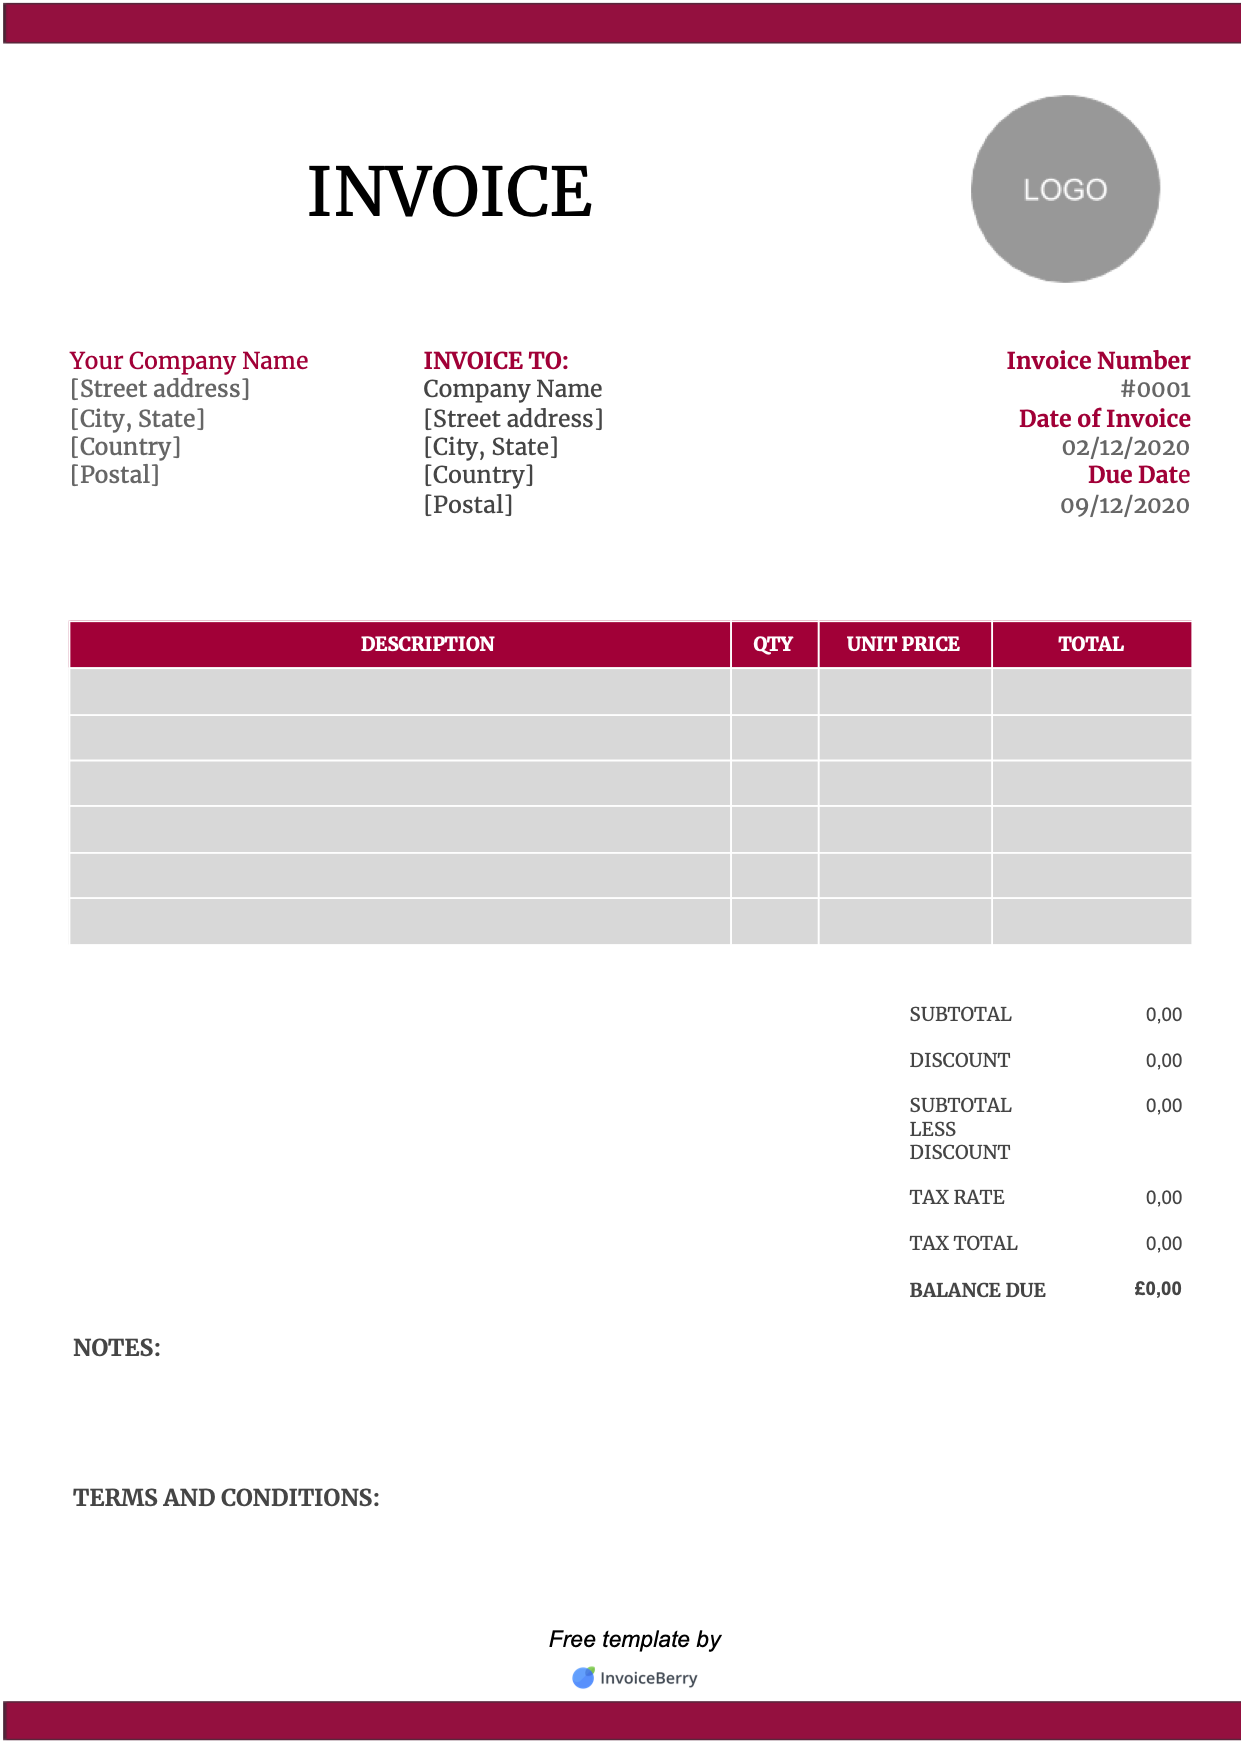 View Work Hours Invoice Template Free Pics * Invoice Template Ideas